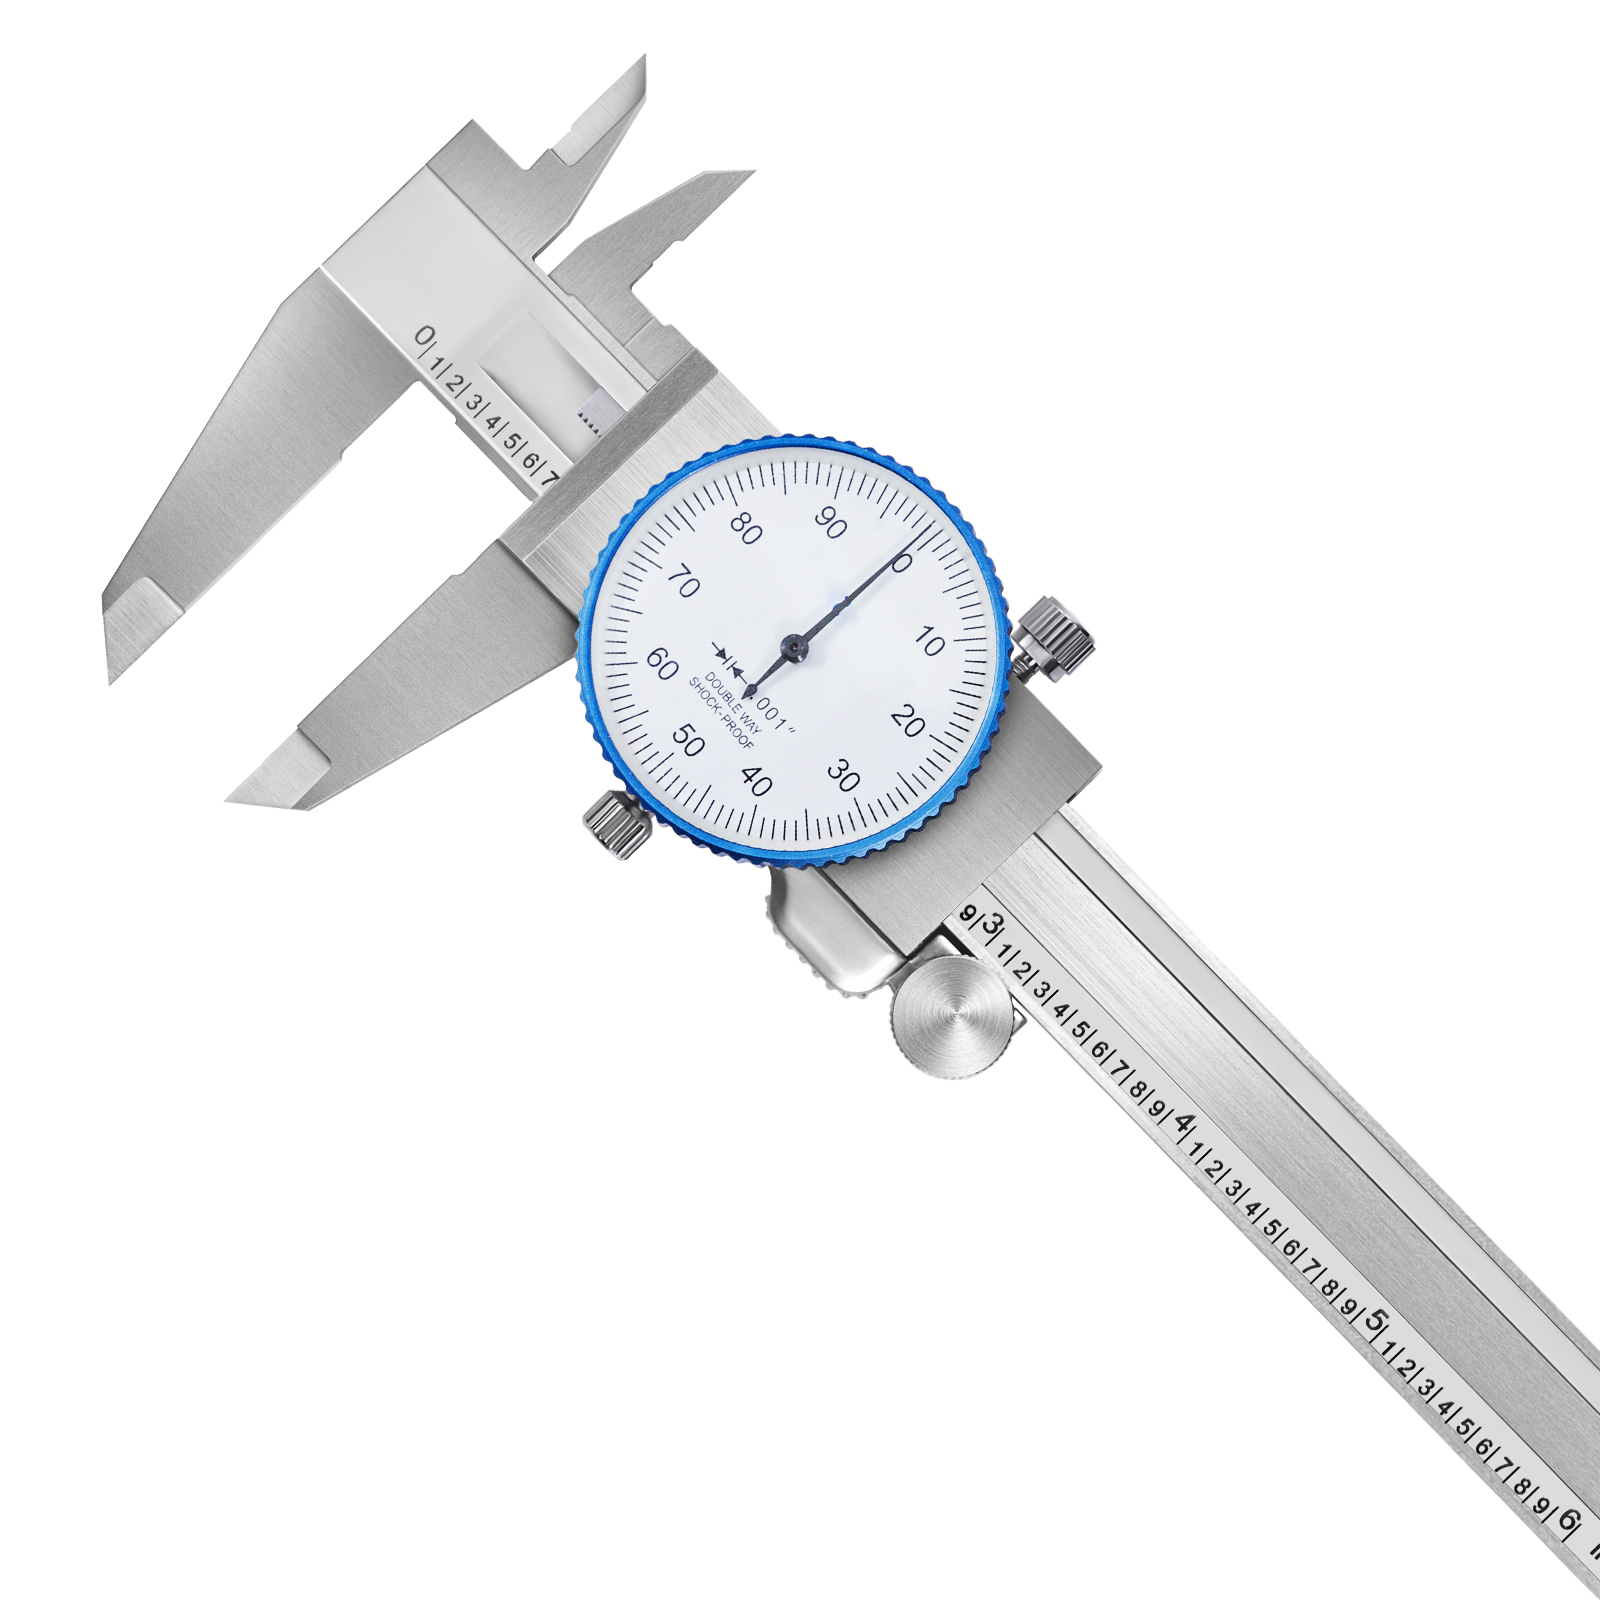 1331-2115-A Double Shock-Proof Dial Caliper Pro Monoblock High Precision with 0-150mm Range, Accuracy of ±0.015mm